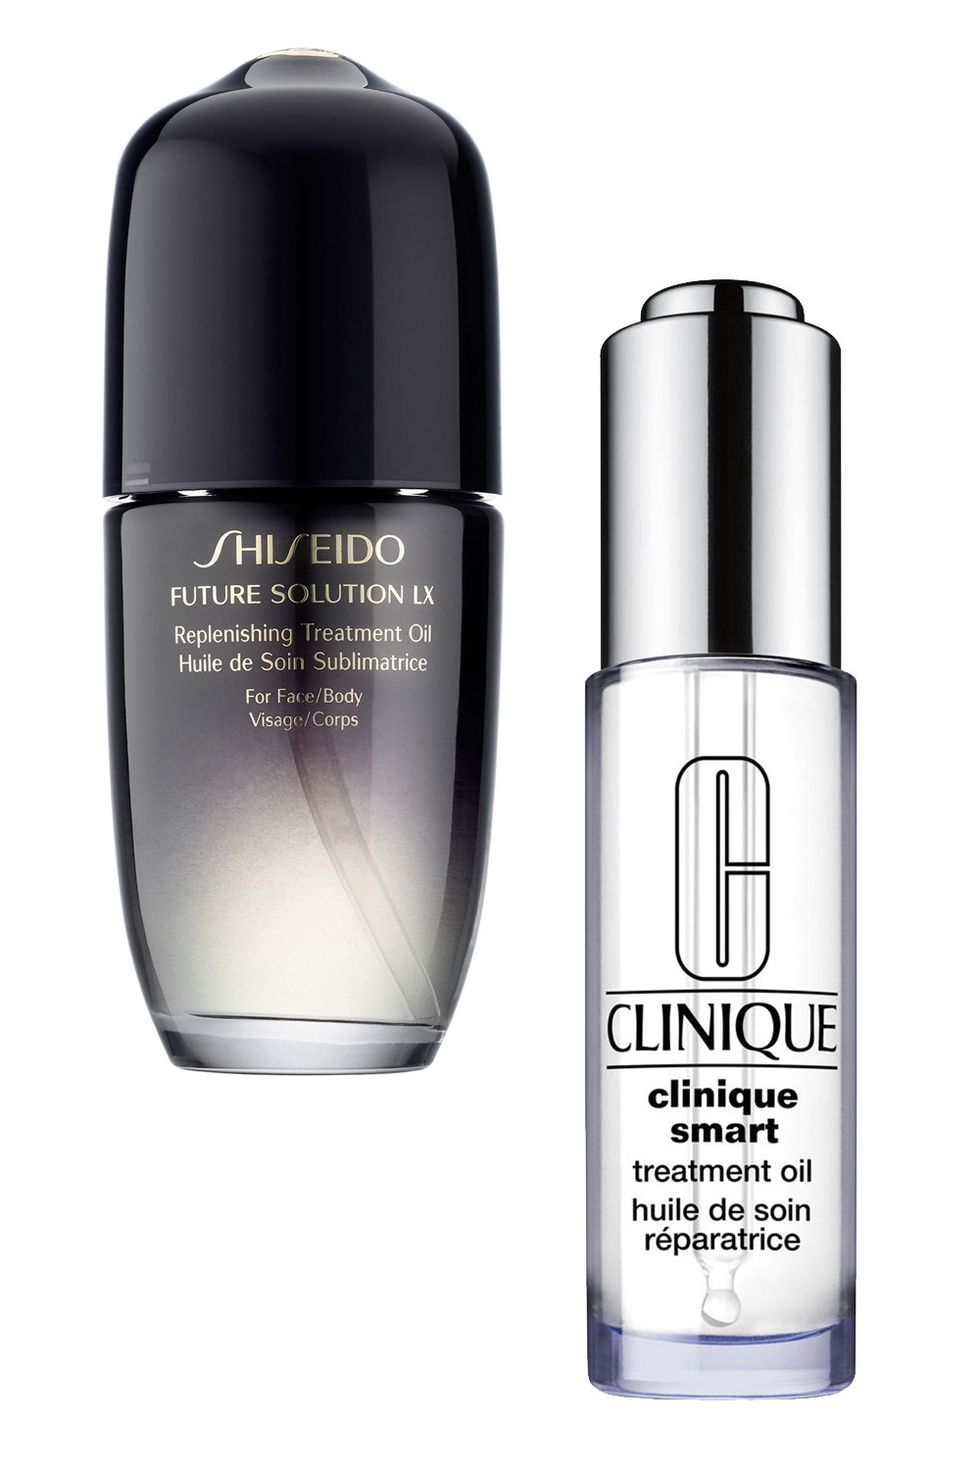 <p>Even if you're not the facial oil type the rest of the year, this is the time to jump on that bandwagon. Lube up your face (and hair and hands and body) with the multitasking marvel that is <a href="http://www.sephora.com/future-solution-lx-replenishing-treatment-oil-P405402?skuId=1798560" target="_blank">Shiseido Future Solution LX Replenishing Treatment Oil</a> or go for something on the lighter side like antioxidant-packed <a href="http://www.clinique.com/product/16320/36598/Skin-Care/Clinique-Smart/Clinique-Smart-Treatment-Oil" target="_blank">Clinique Smart Treatment Oil.</a></p>